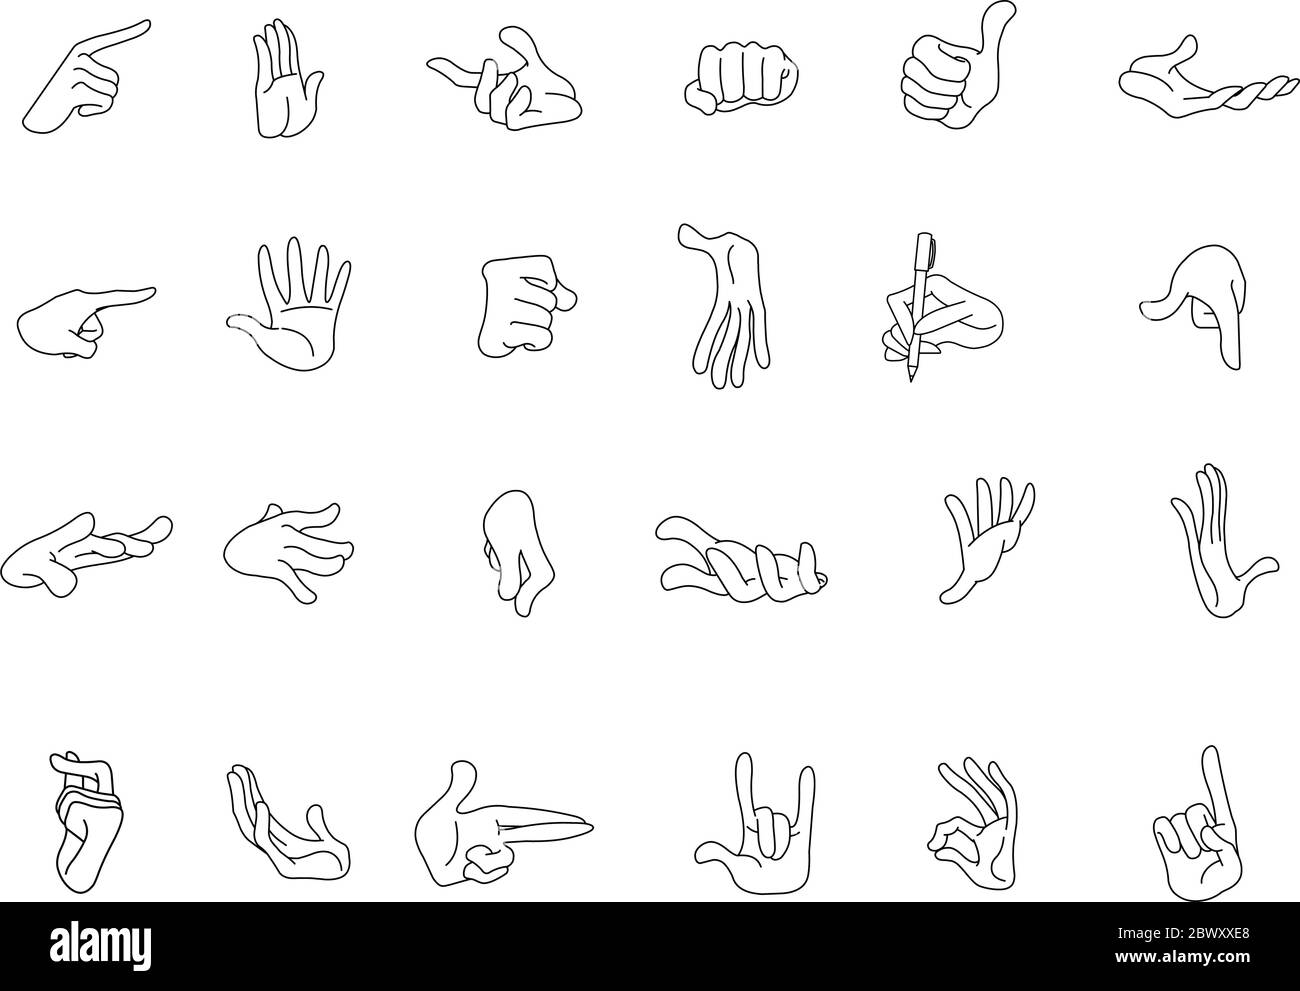 Outlined hand gestures Stock Vector